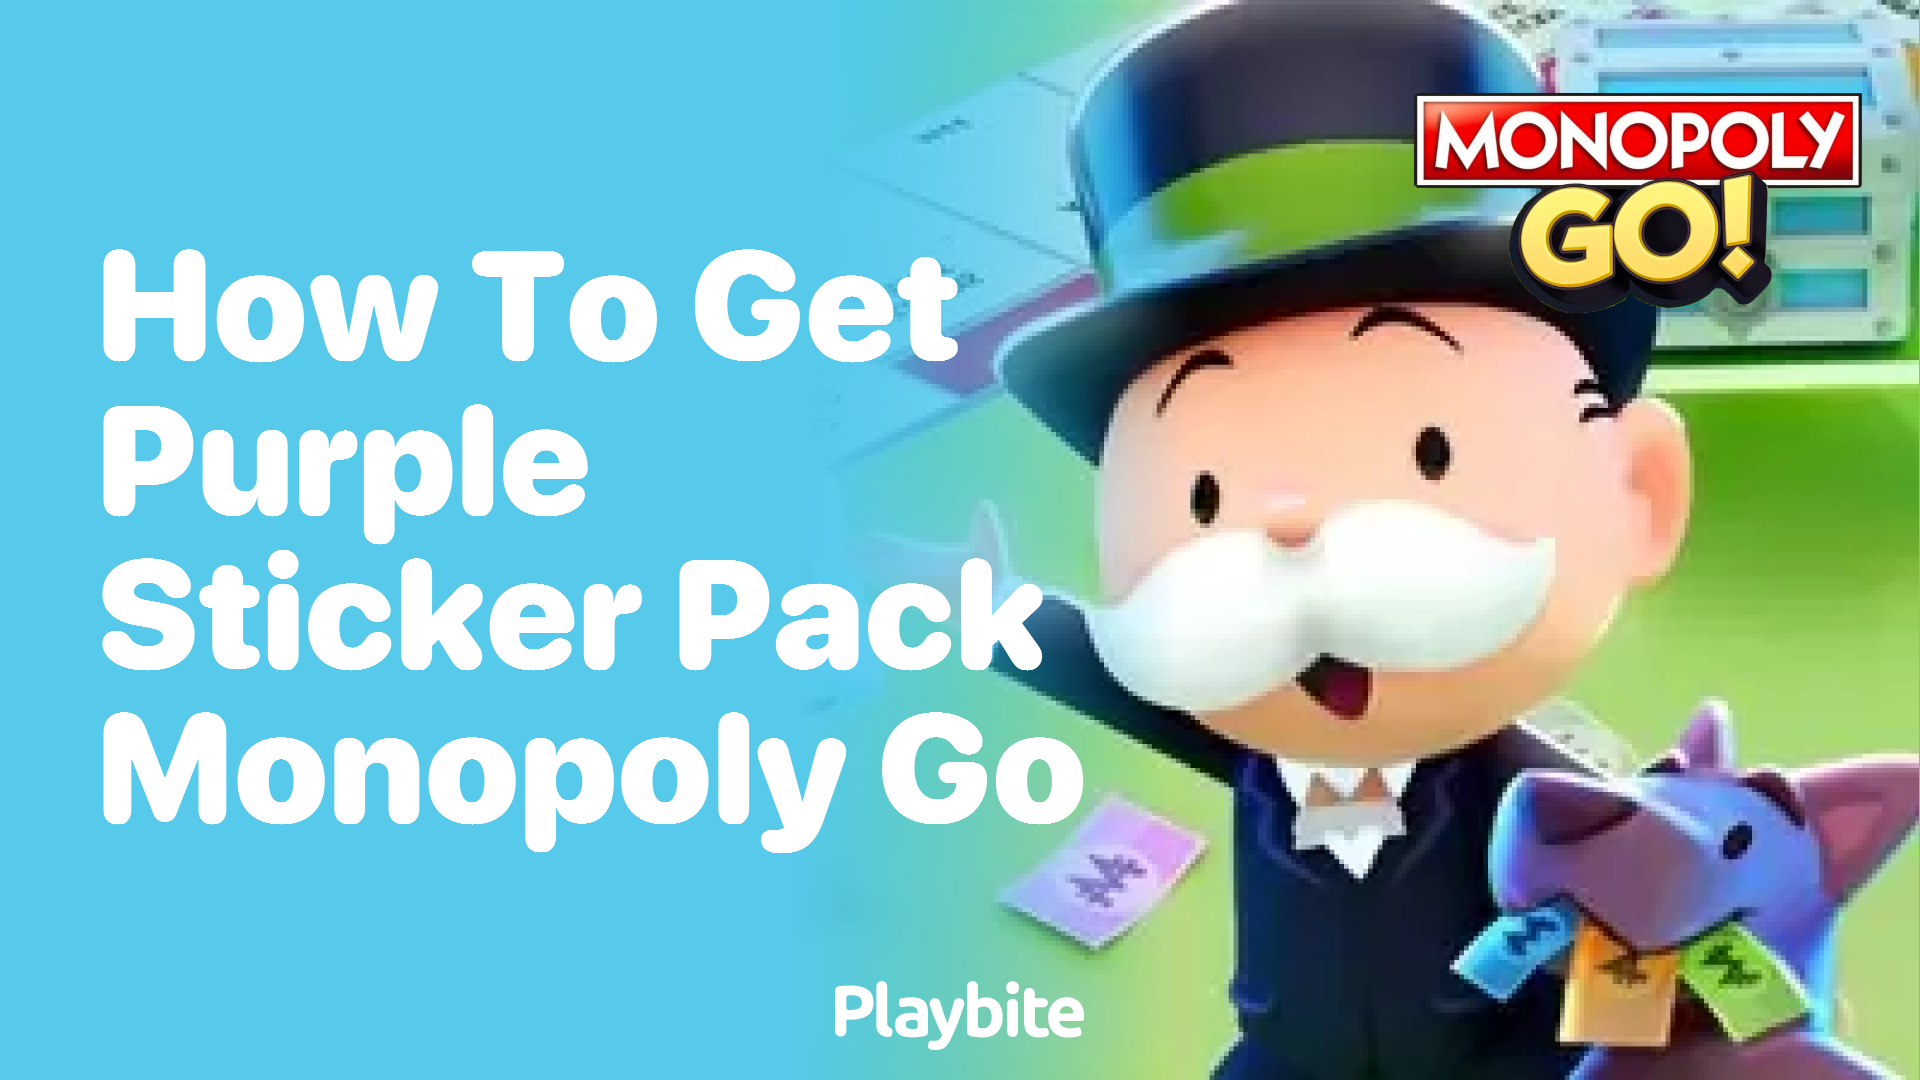 How to Get the Purple Sticker Pack in Monopoly Go